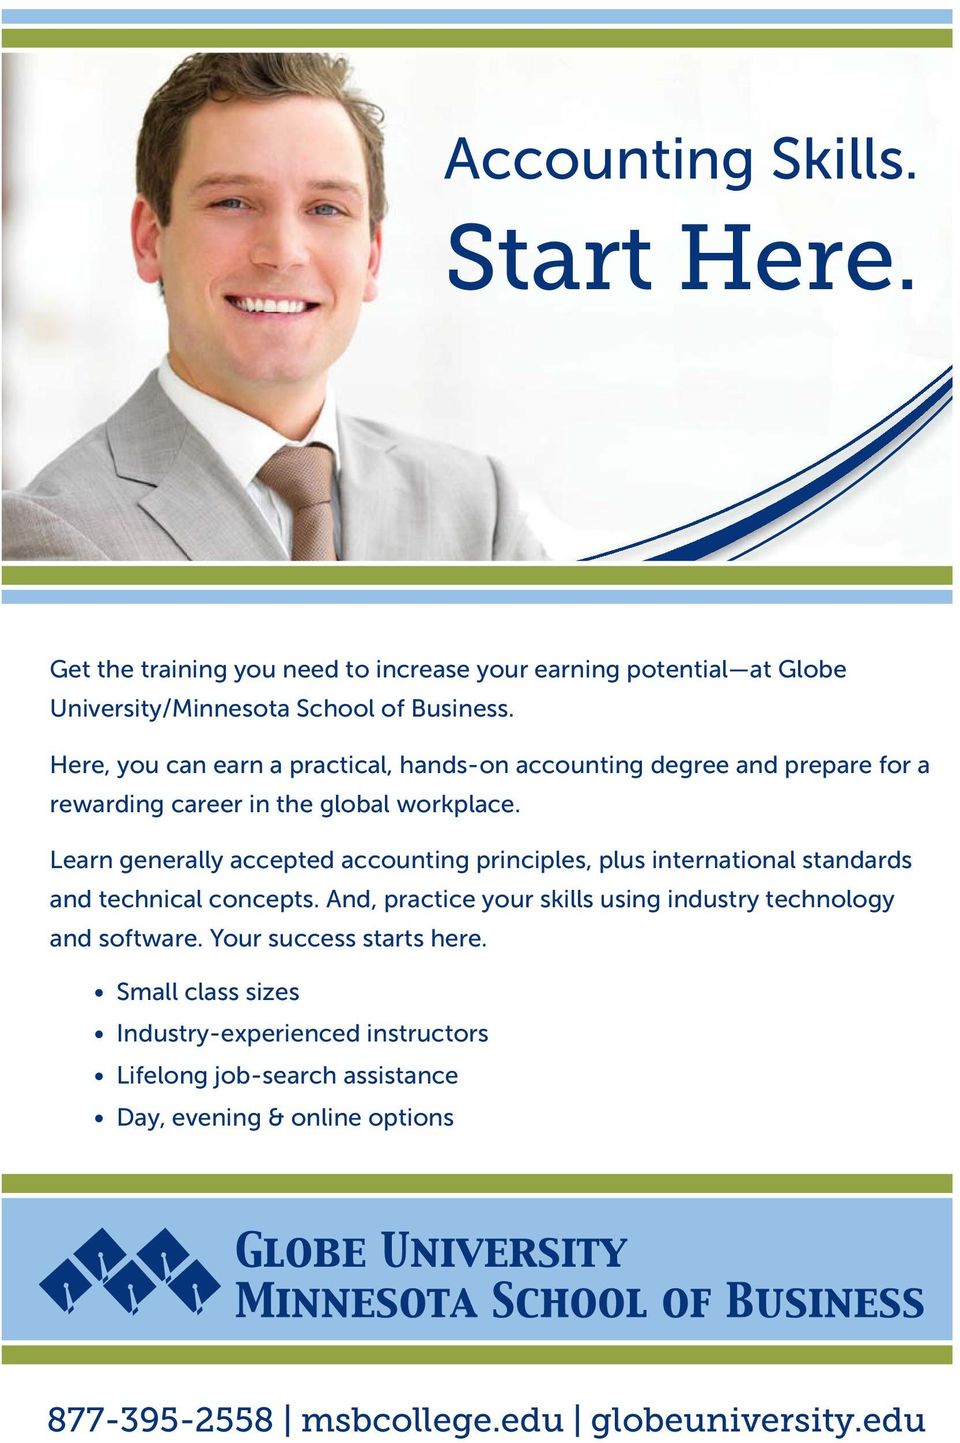 Here, you can earn a practical, hands-on accounting degree and prepare for a rewarding career in the global workplace.